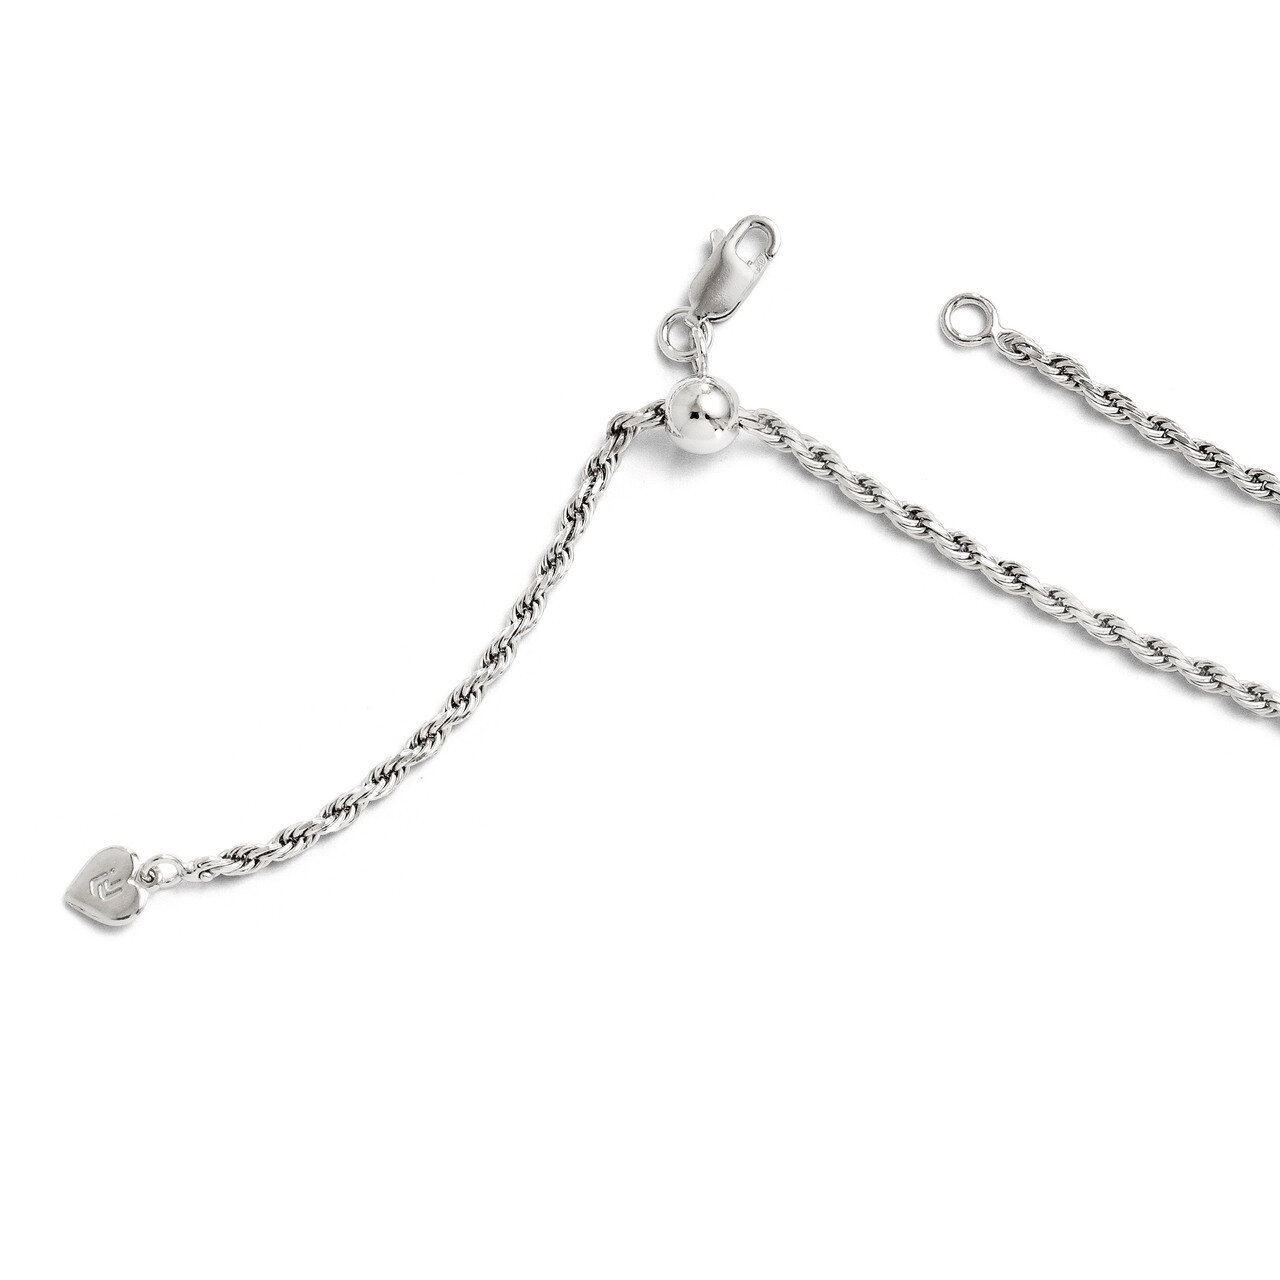 Adjustable Rope Chain 30 Inch - Sterling Silver HB-FC30-30